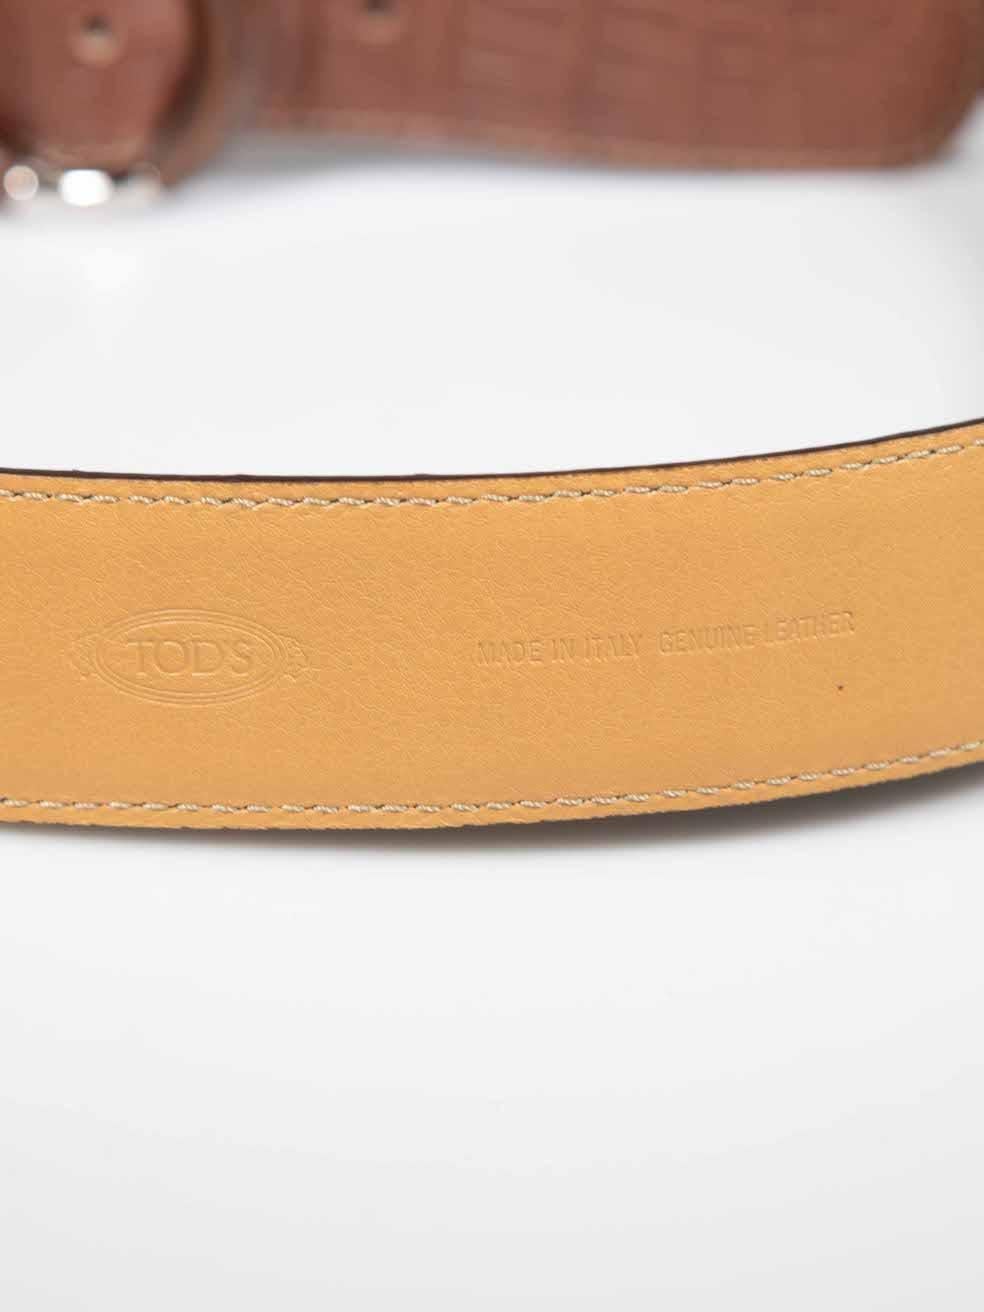 Tod's Brown Leather Croc Embossed Belt For Sale 4